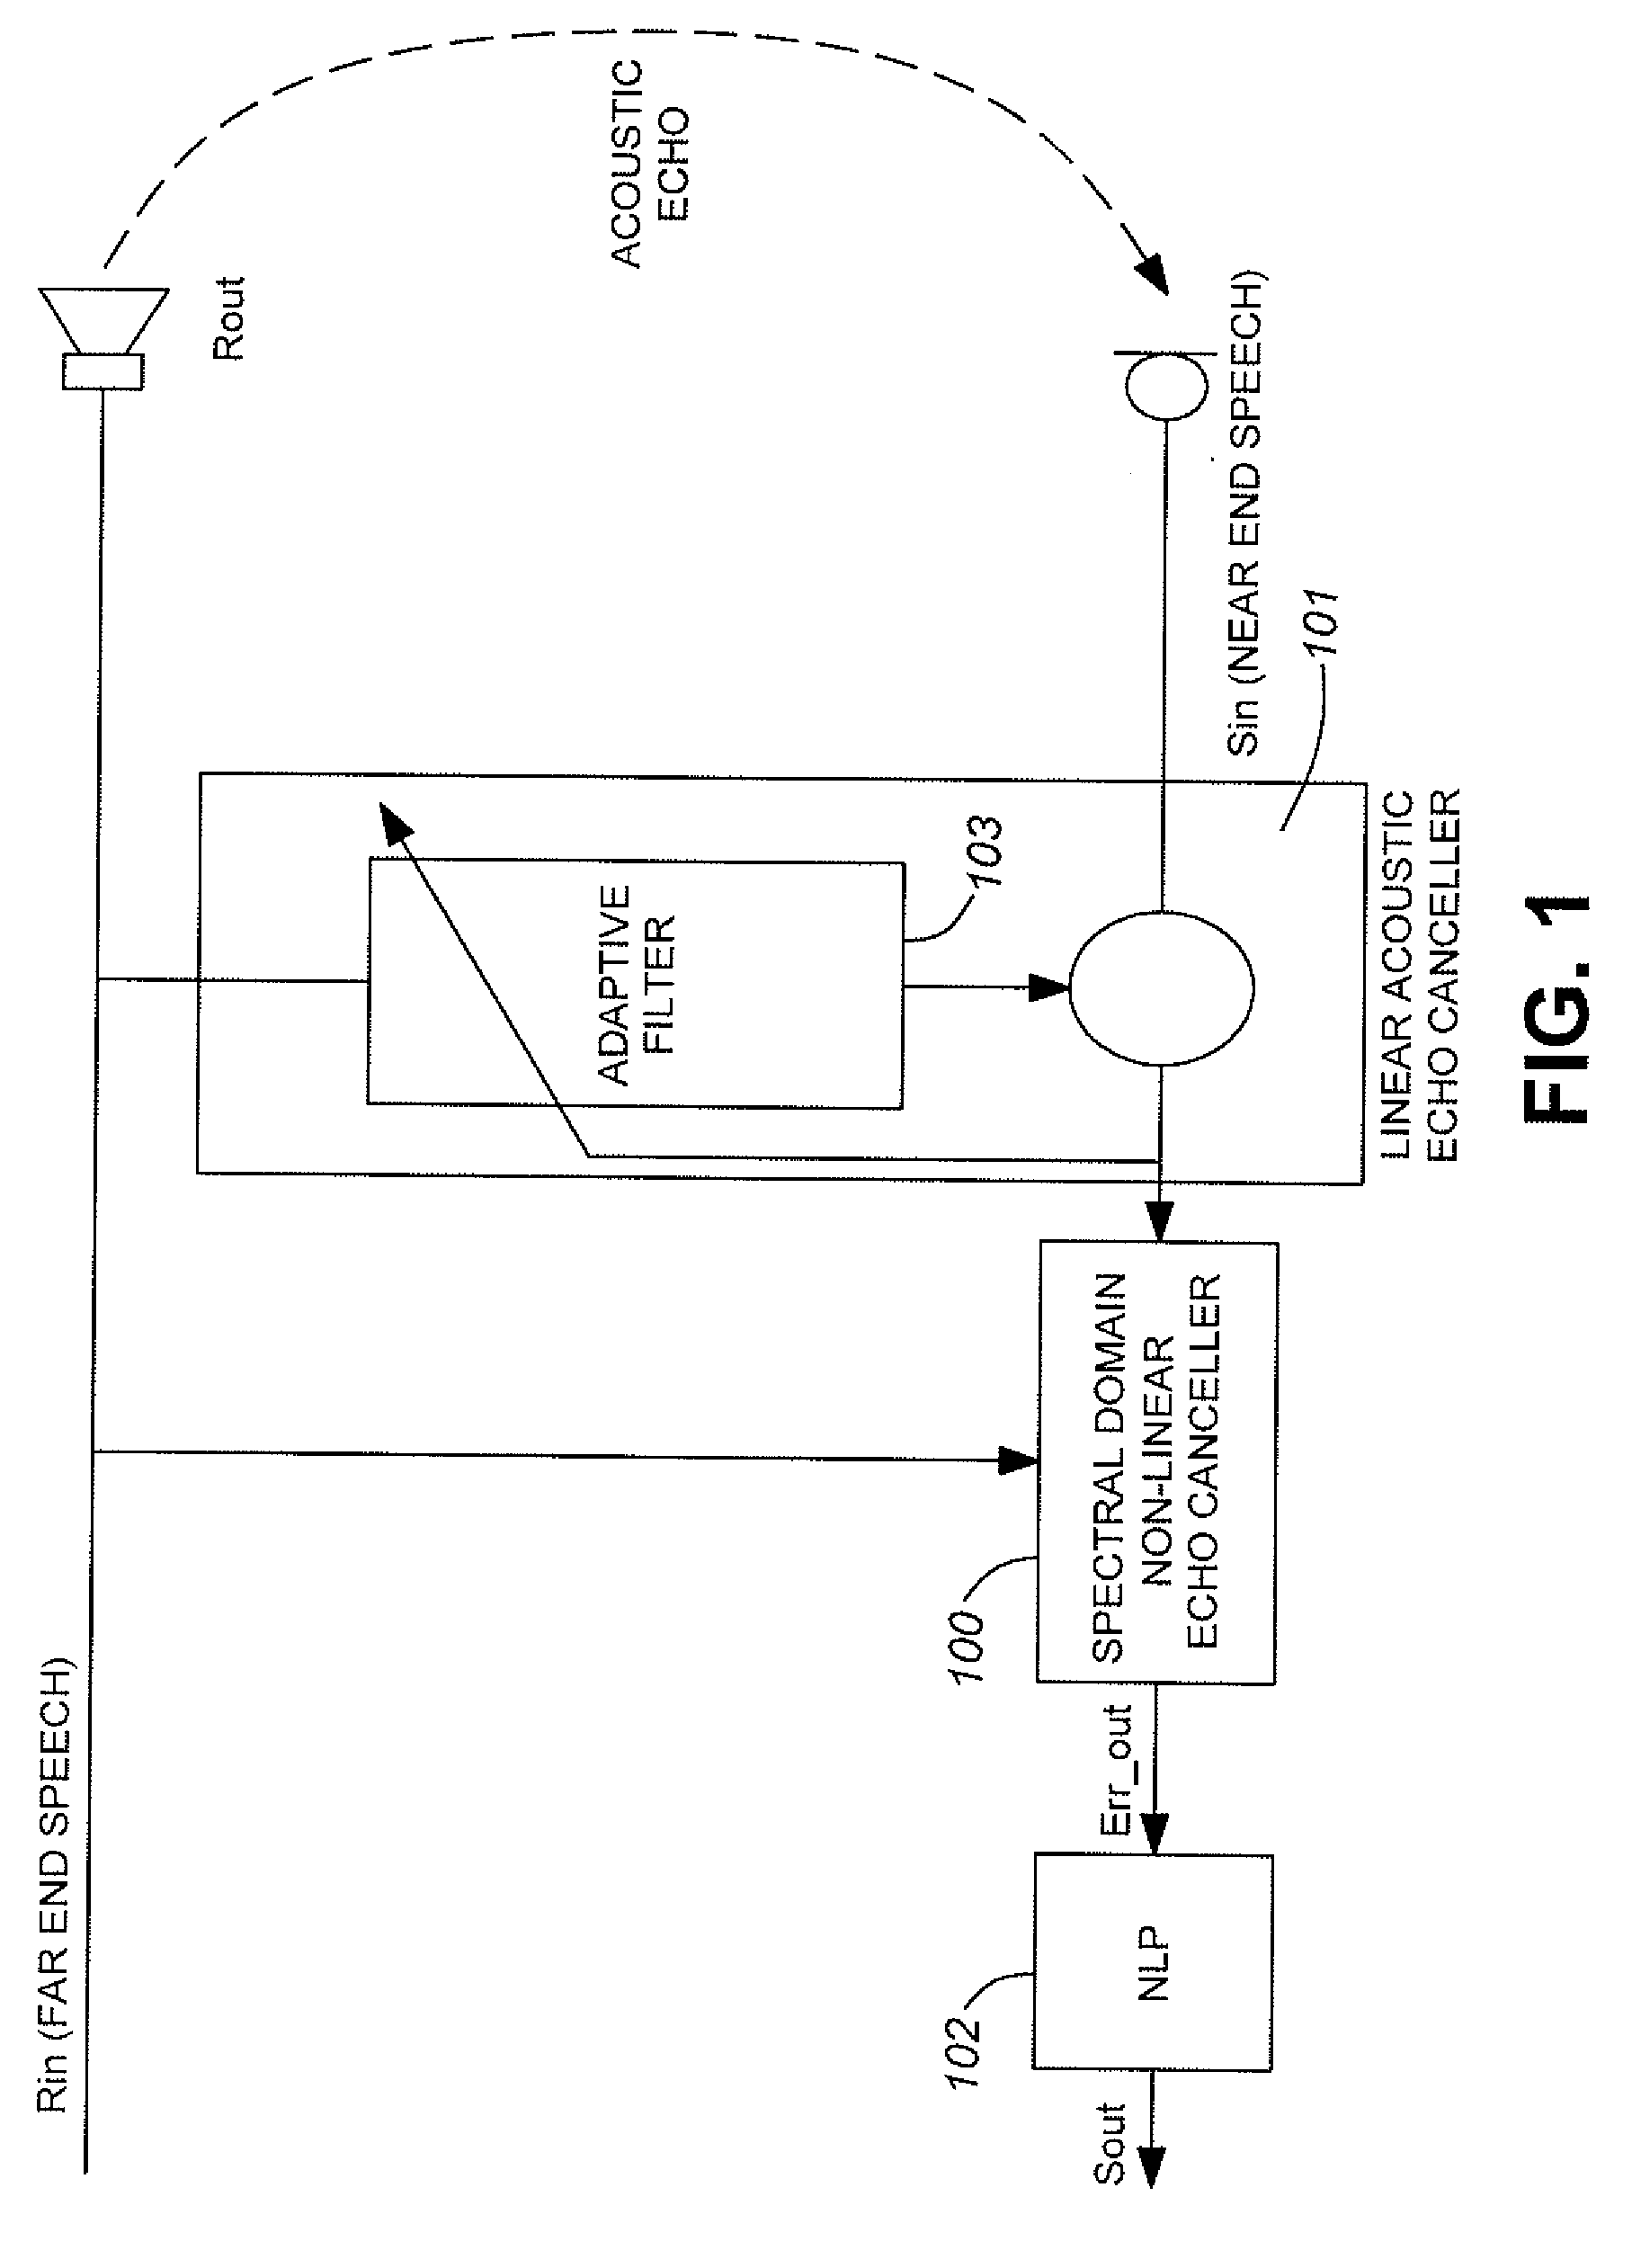 Spectral domain, non-linear echo cancellation method in a hands-free device